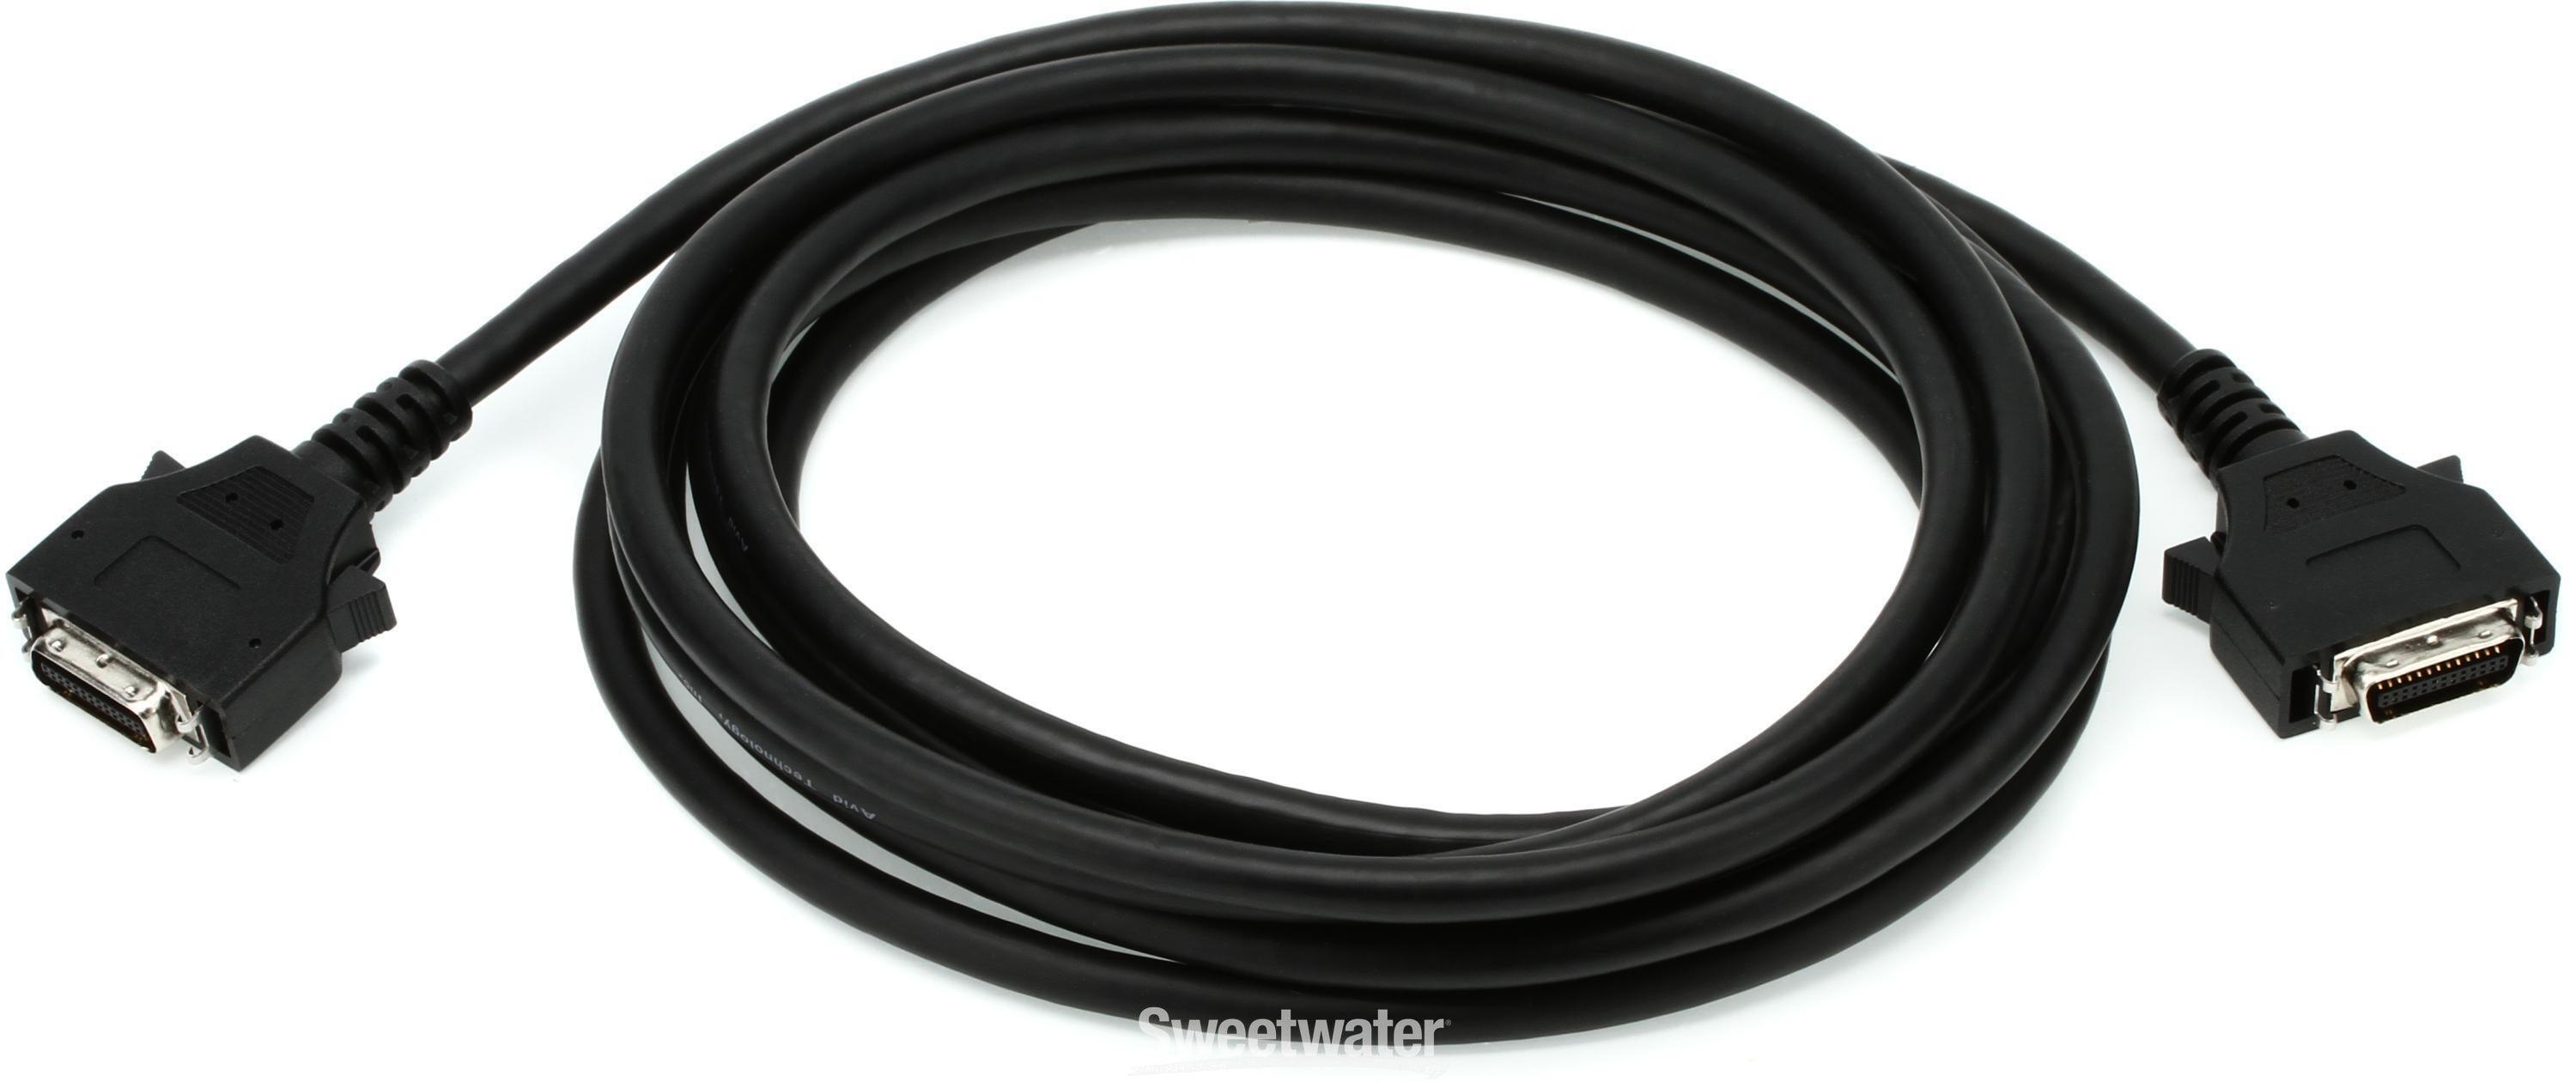 Avid DigiLink Cable - 12 foot | Sweetwater